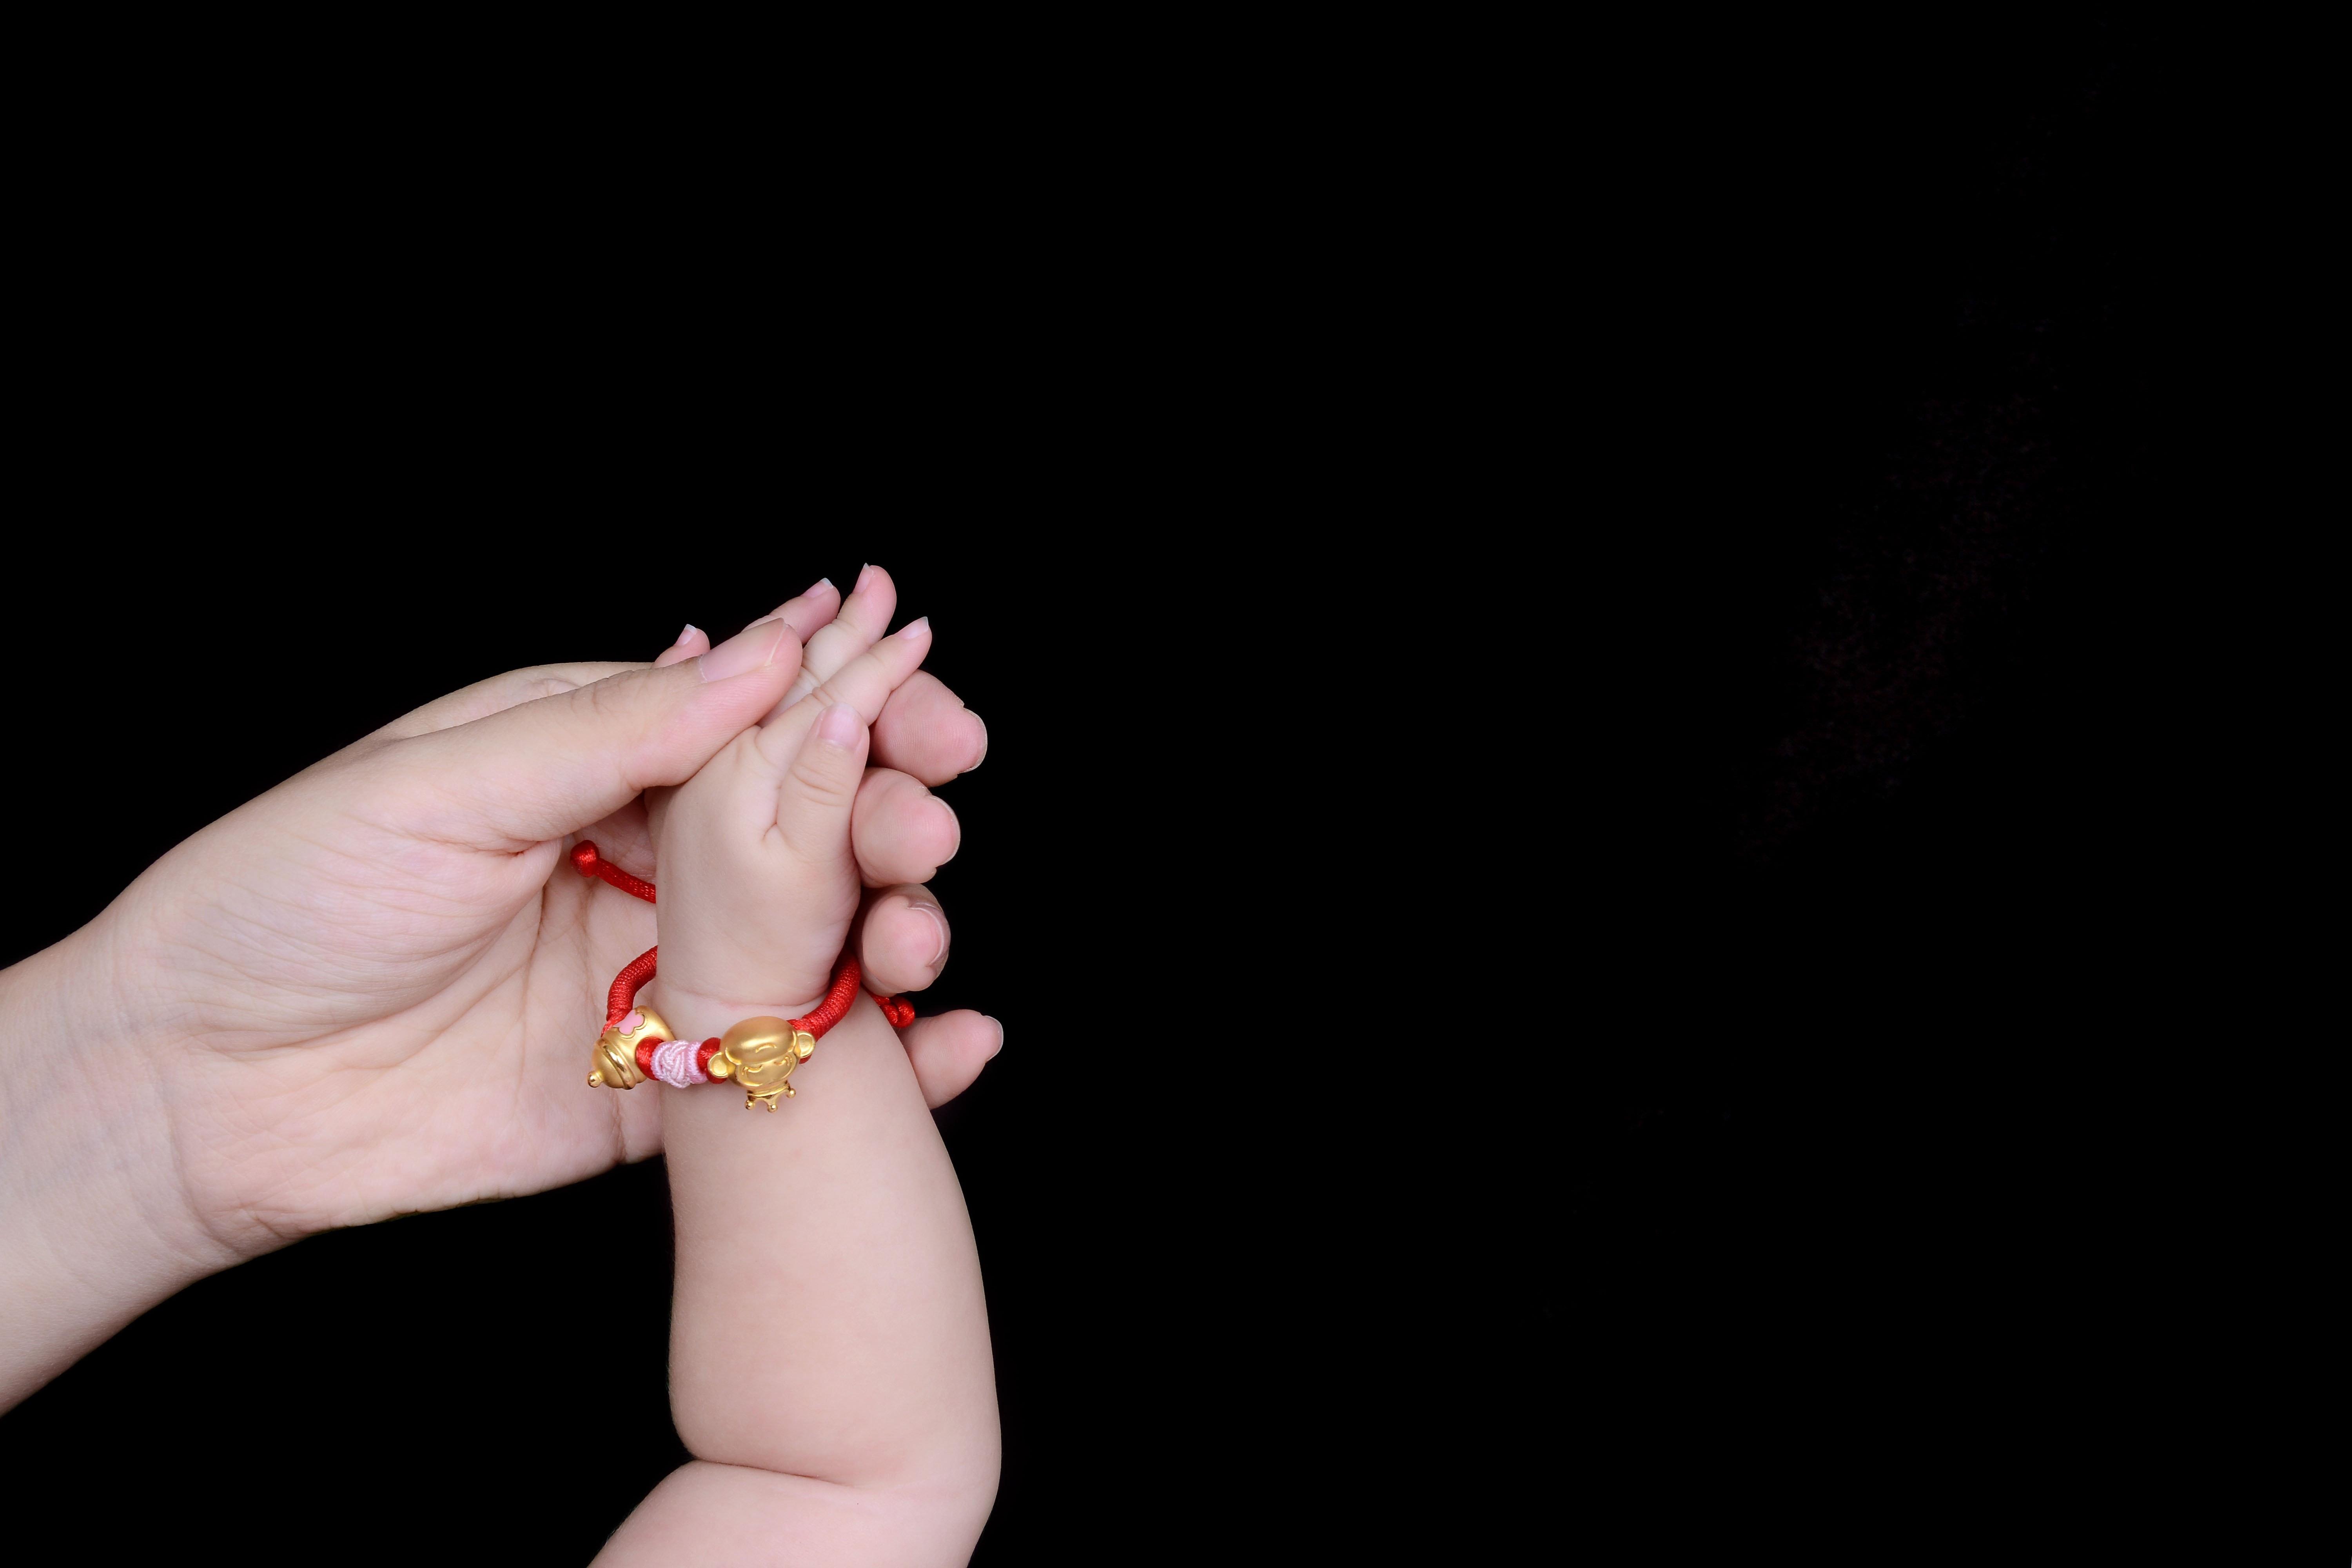 Person Holding Baby's Hand · Free